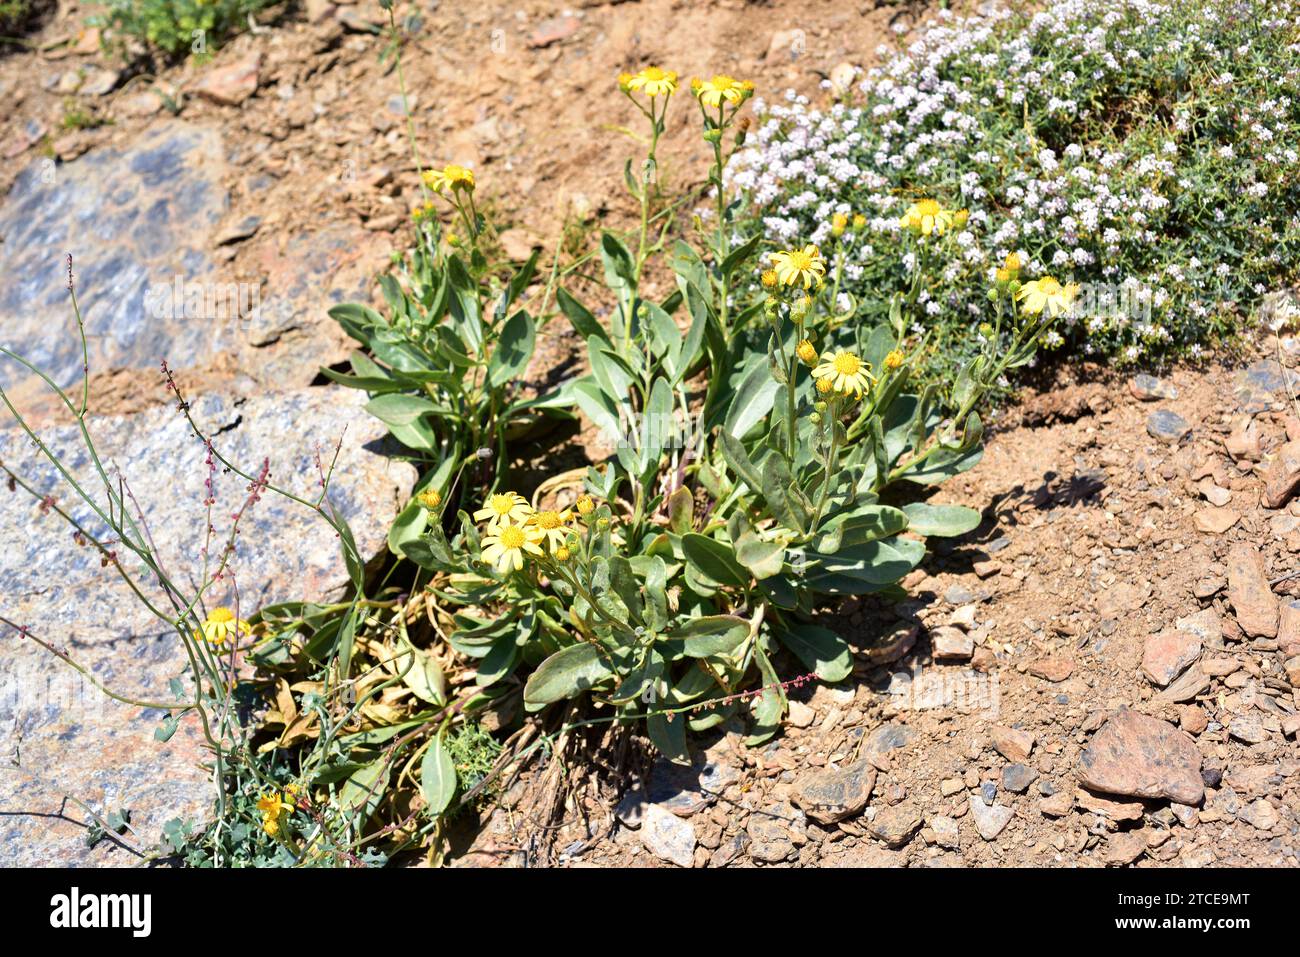 Suzon de Sierra Nevada (Senecio pyrenaicus granatensis) is a subspecies endemic to Sierra Nevada National Park and other nearby mountains. This photo Stock Photo